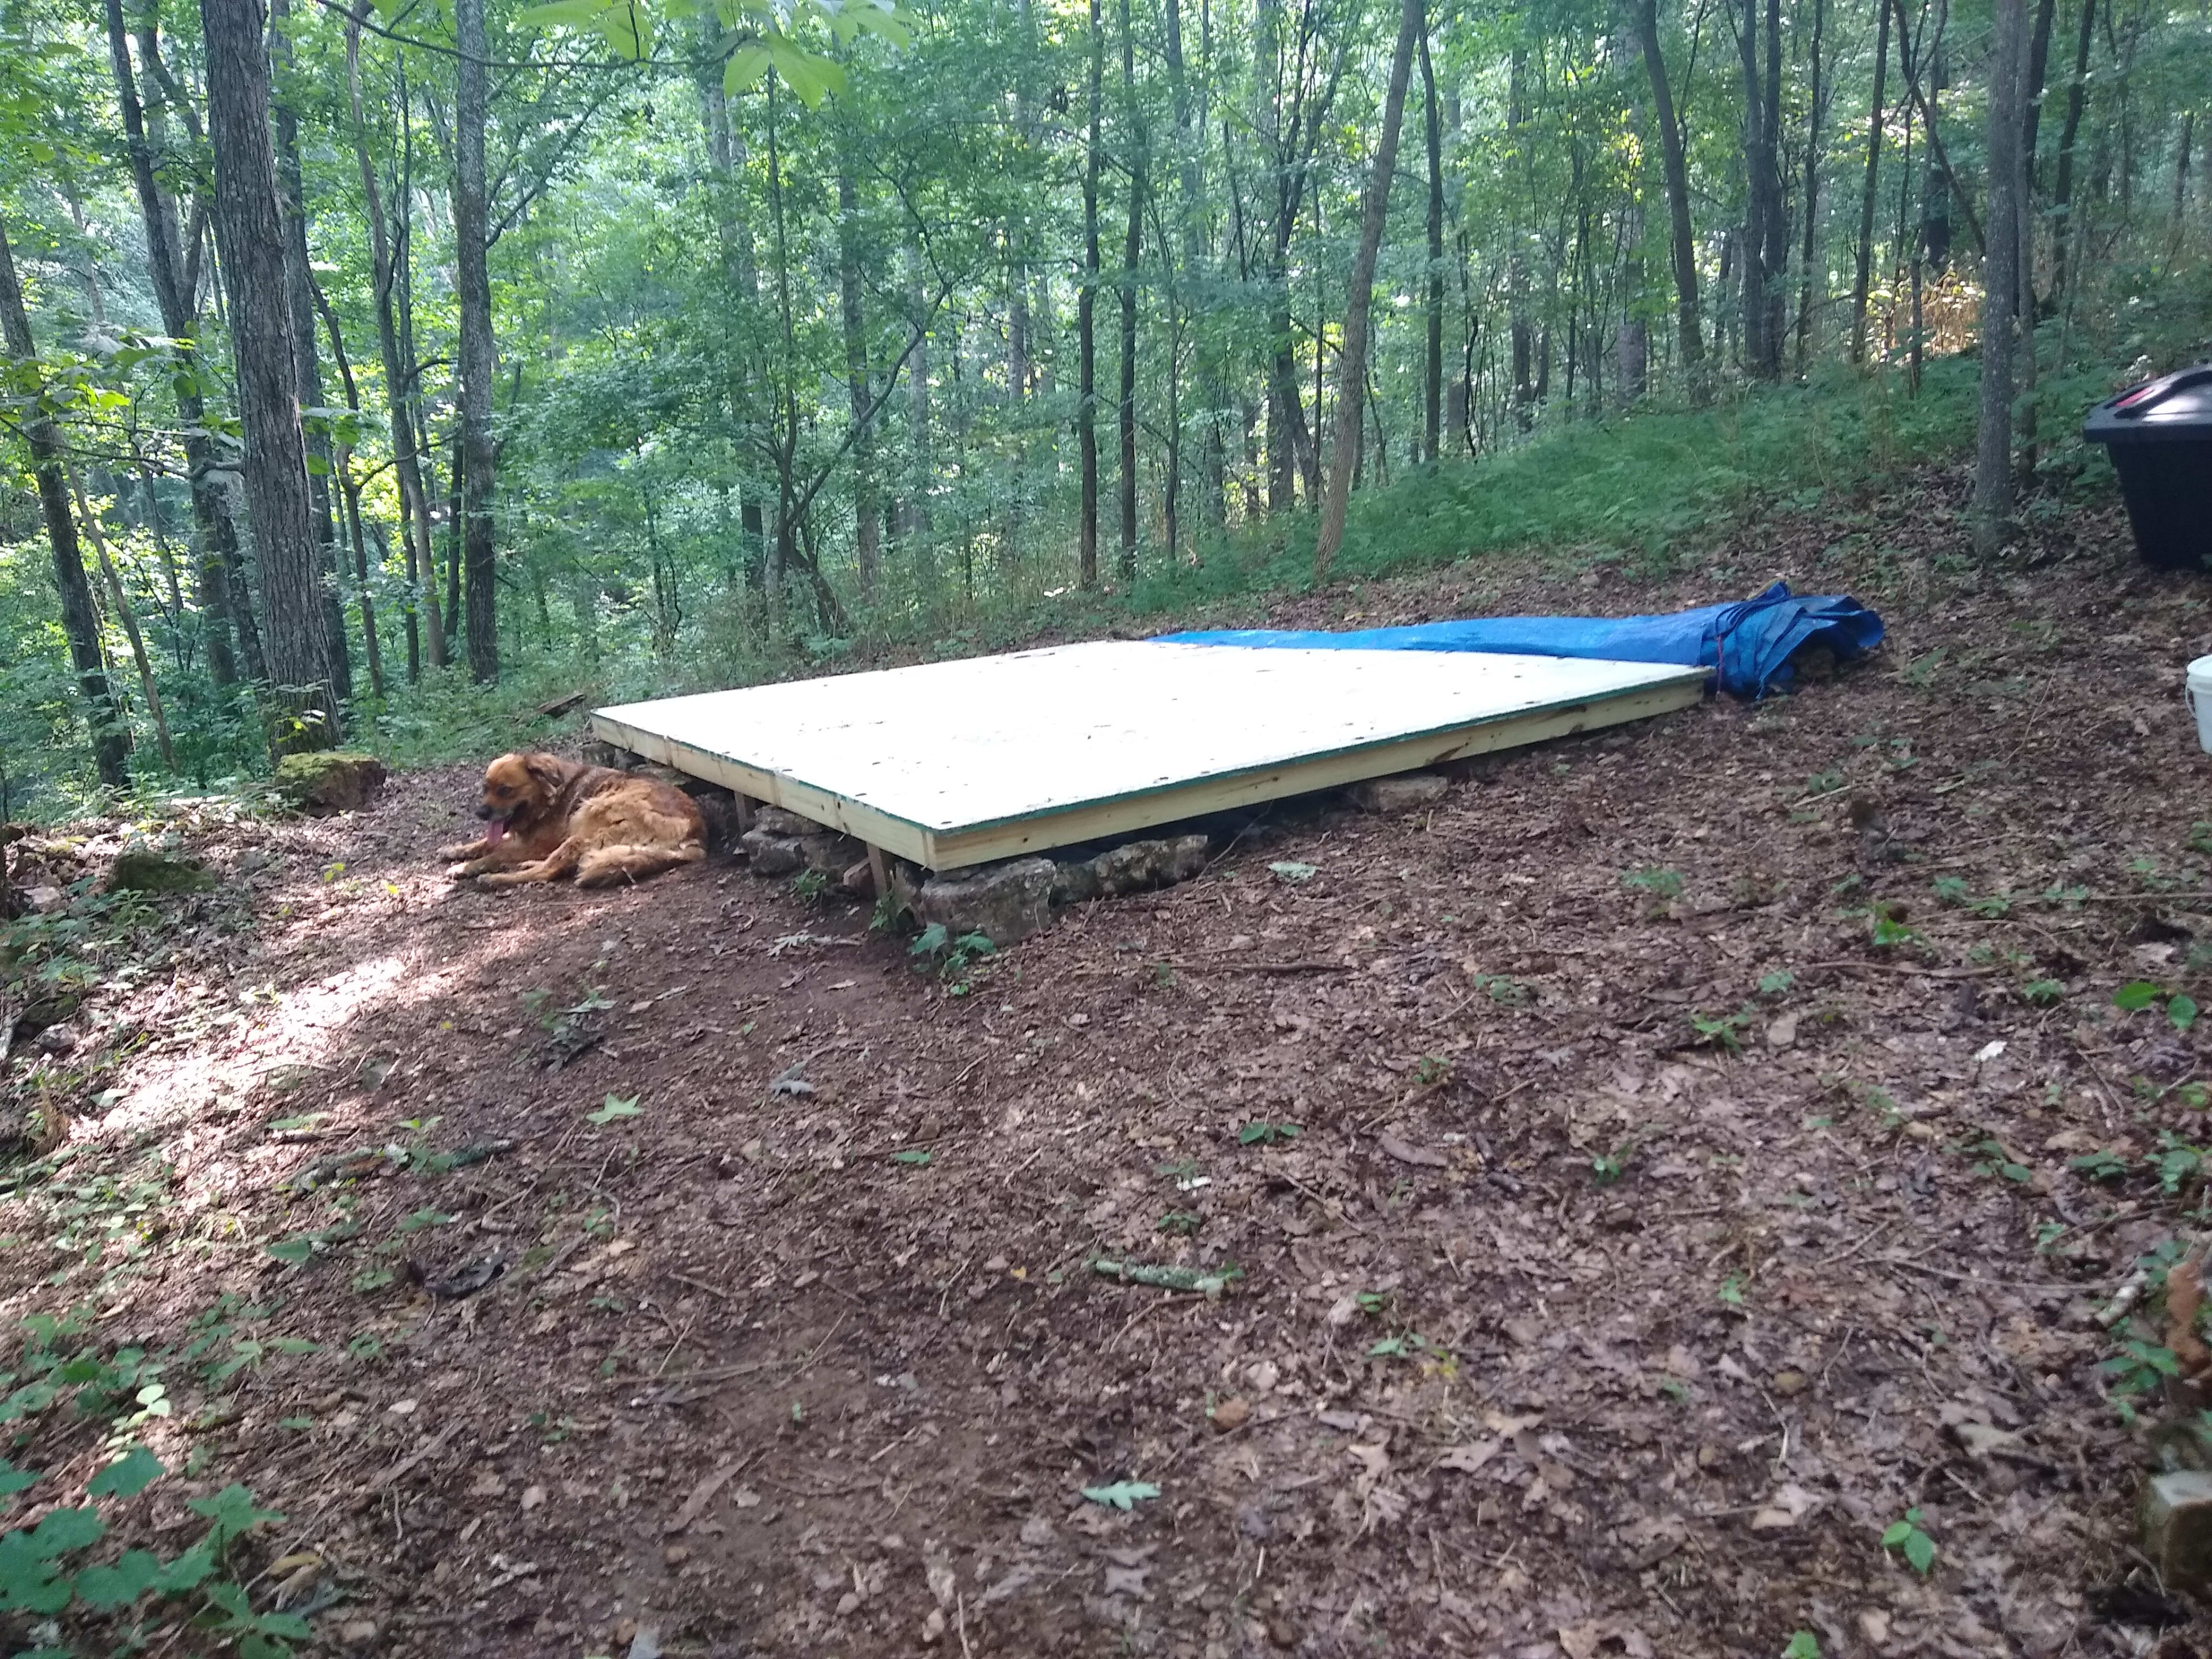 Tent platform. Keeps you off the ground and provides a level space for your tent.